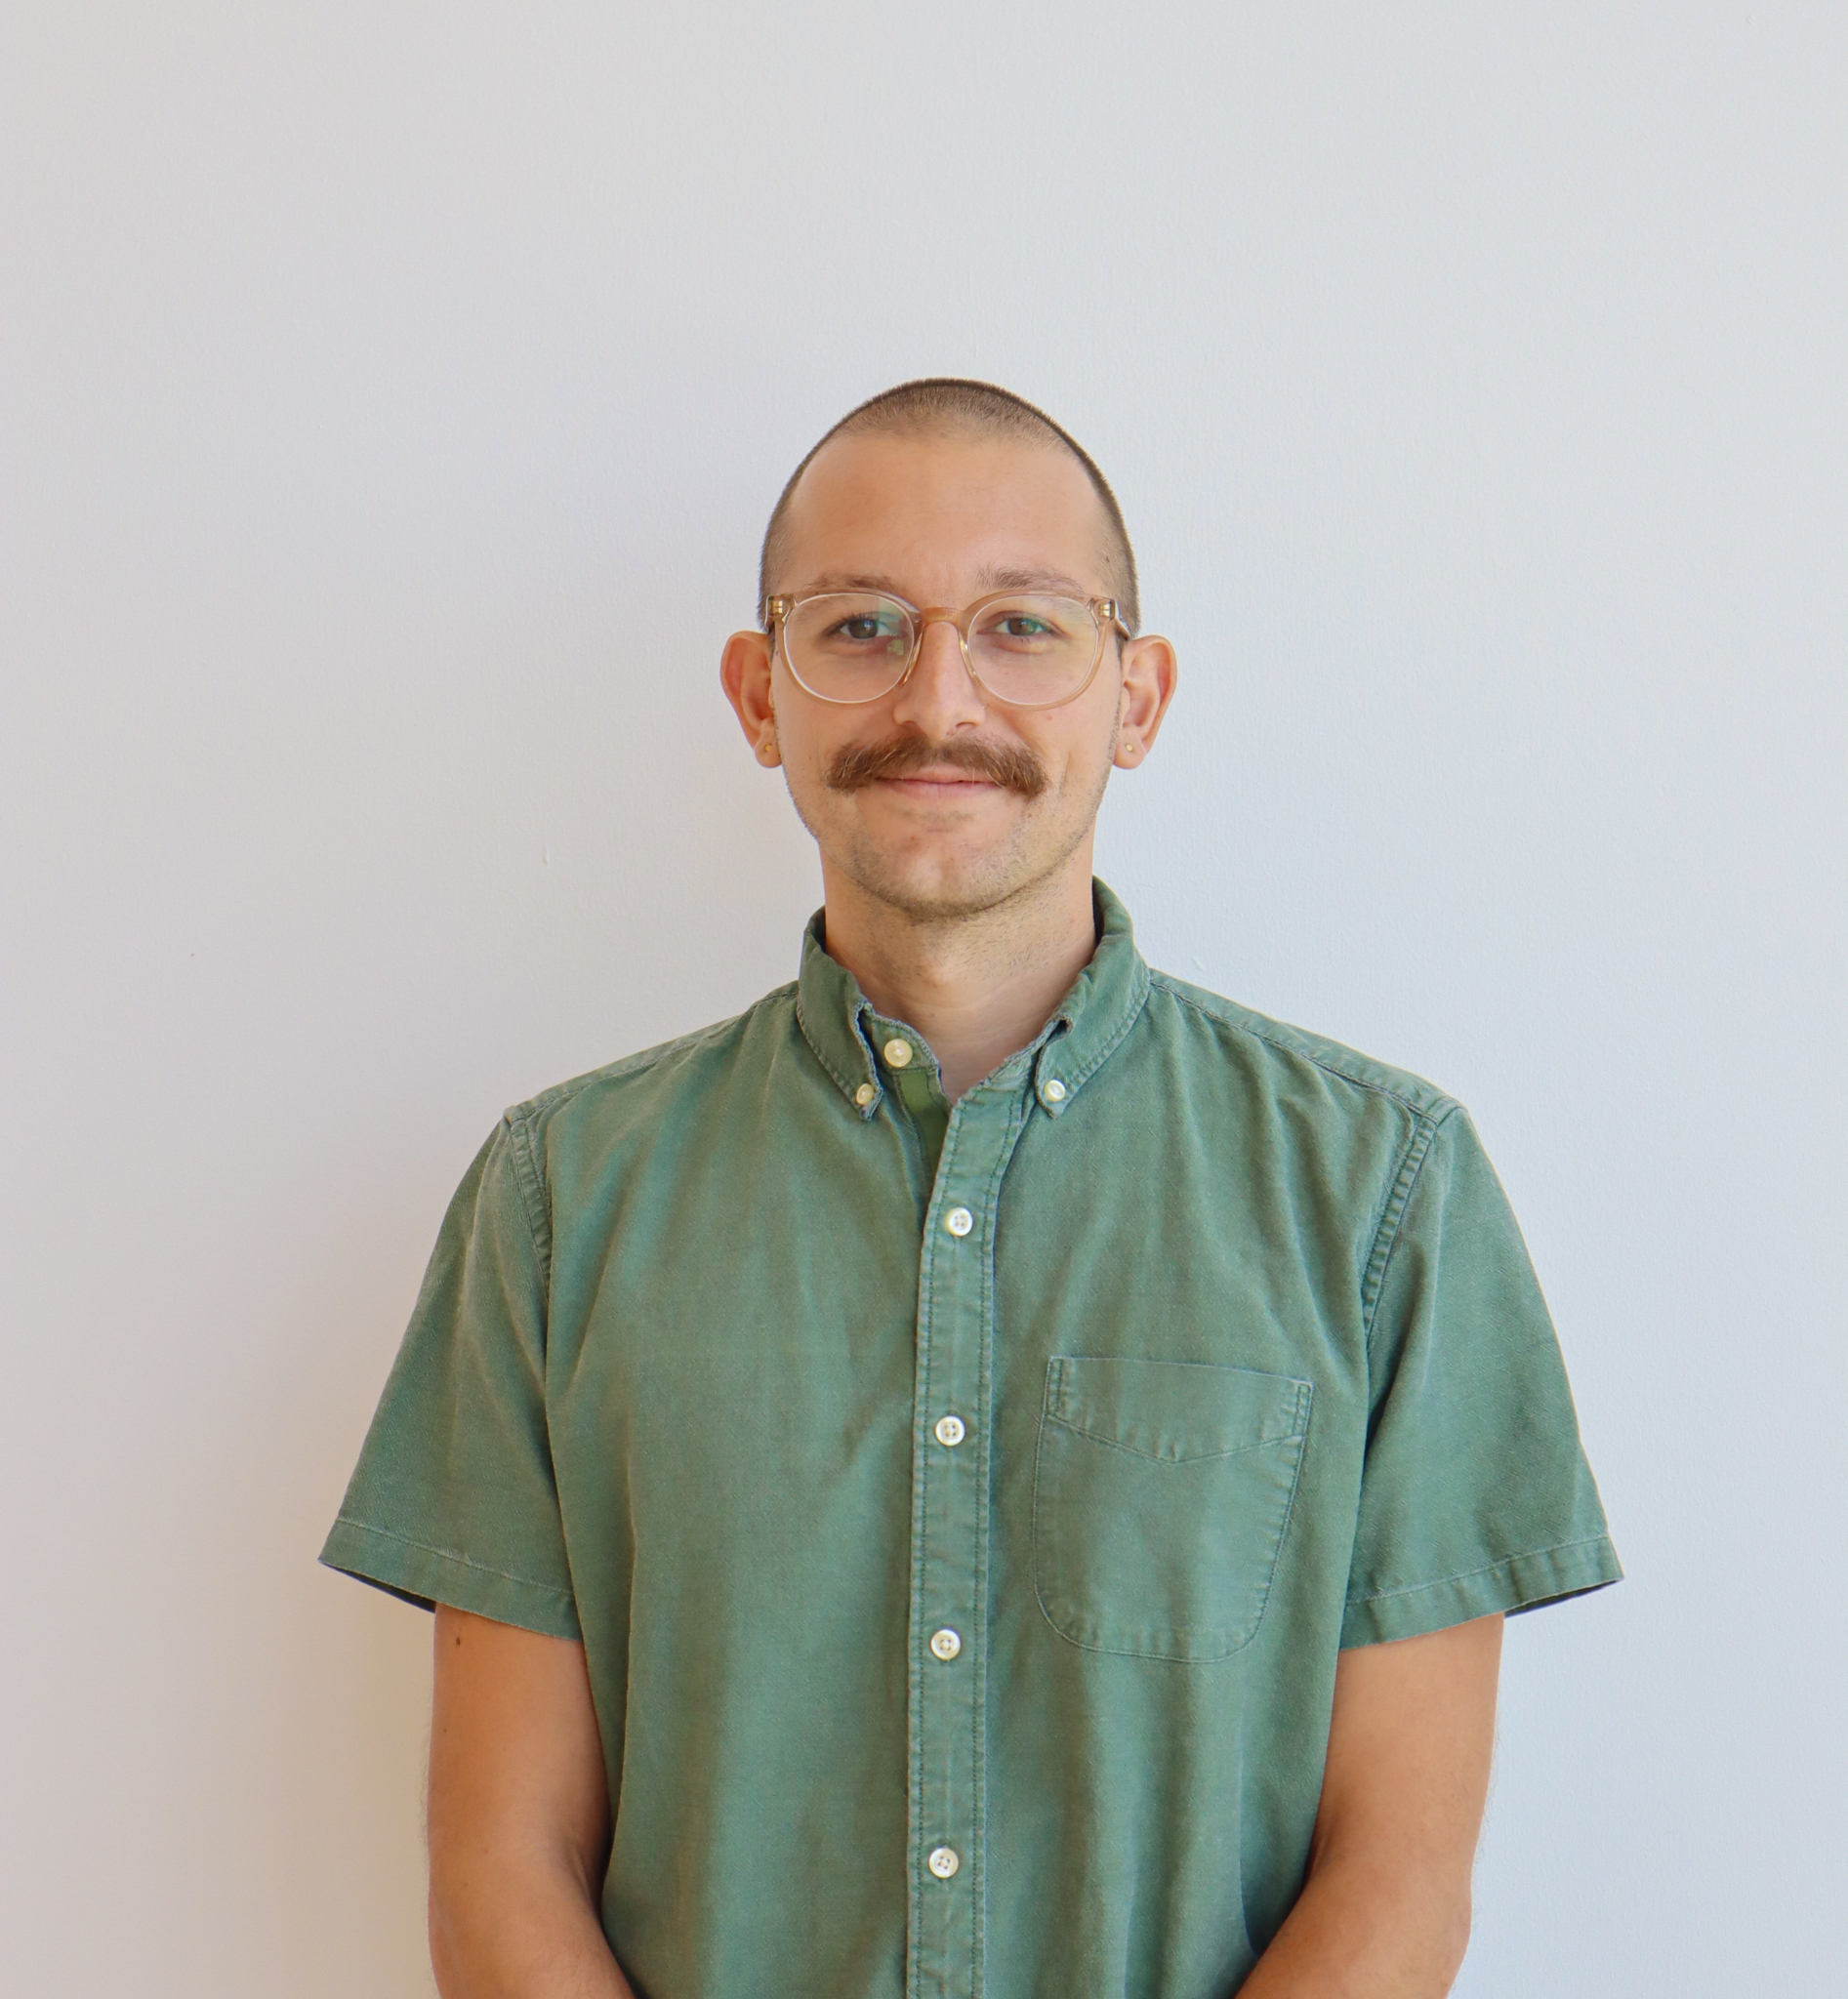 A person with a mustache wearing a green button-up shirt and glasses